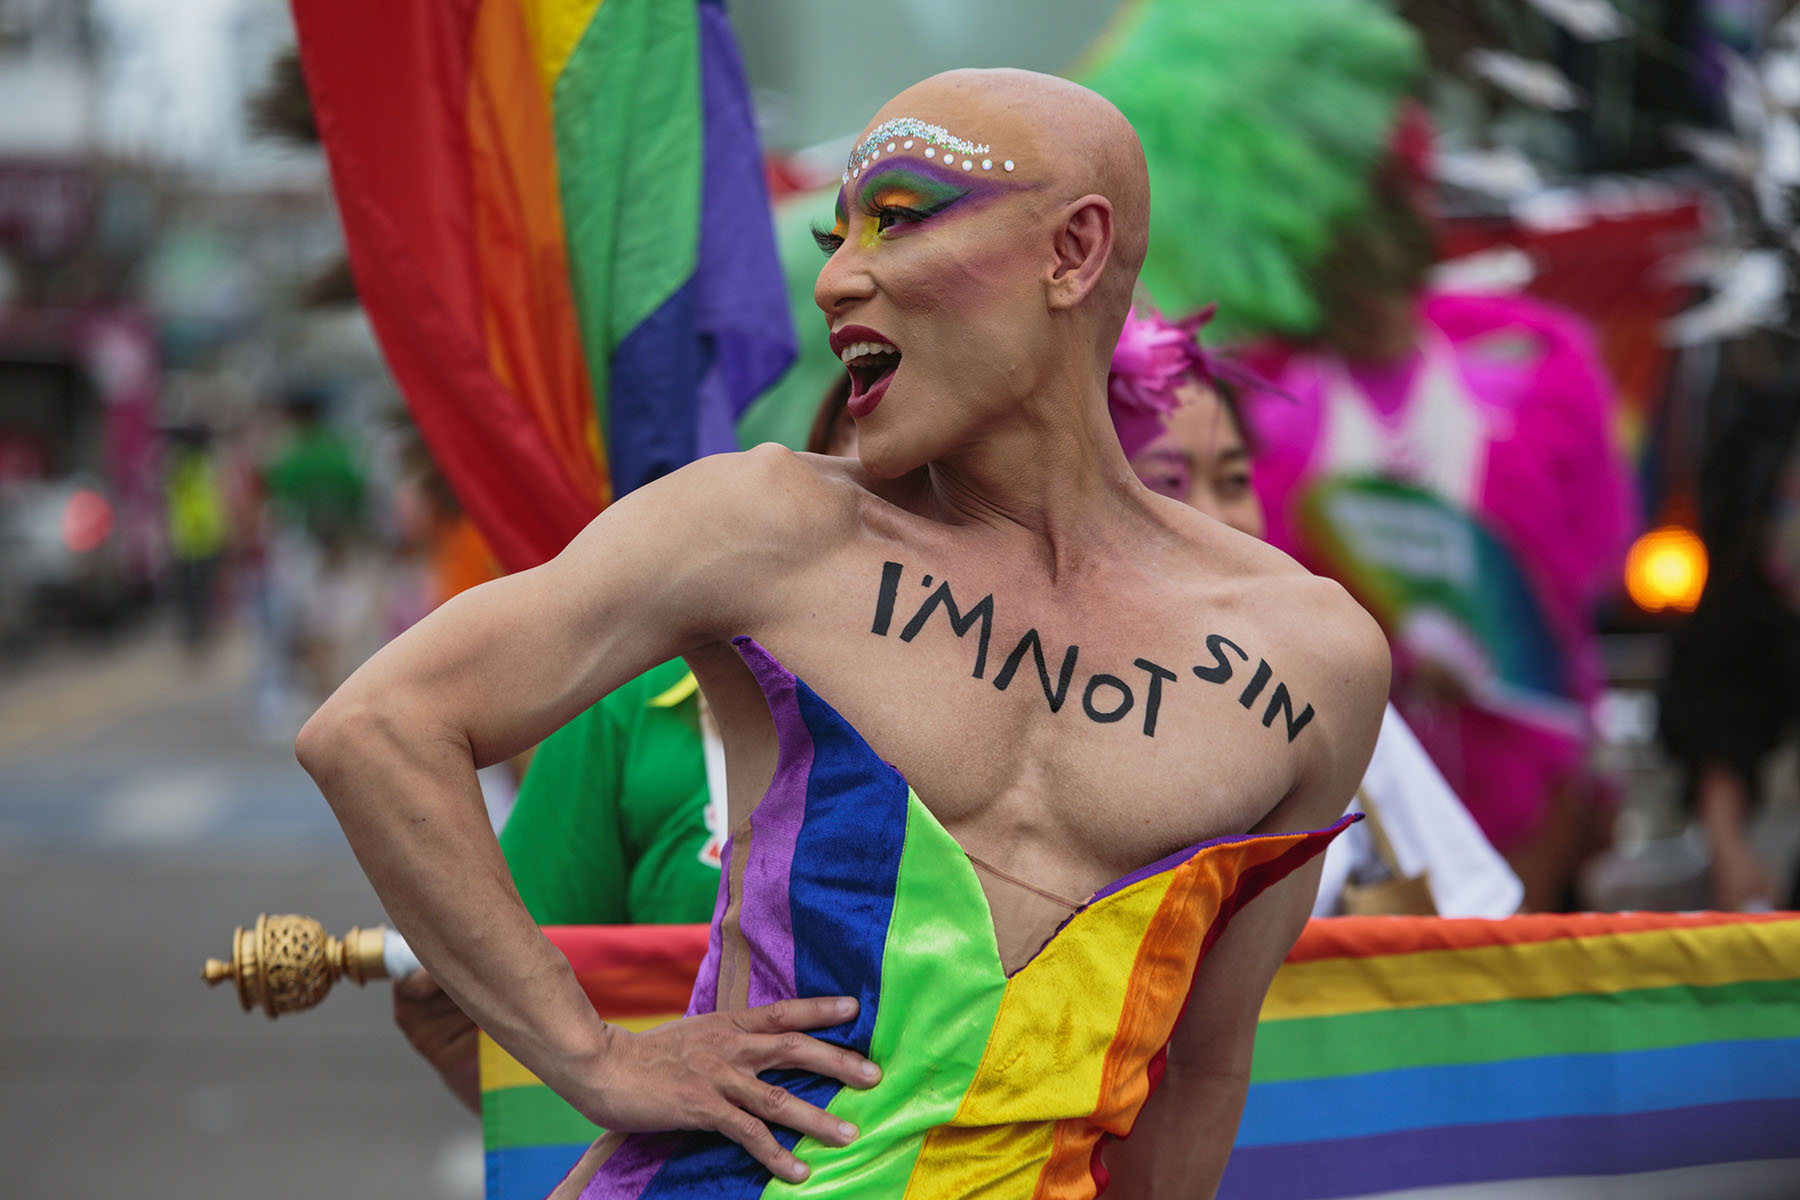 LGBT activist looking immaculate while they pose for a picture during the 2023 Pride Parade in Pattaya, Thailand.